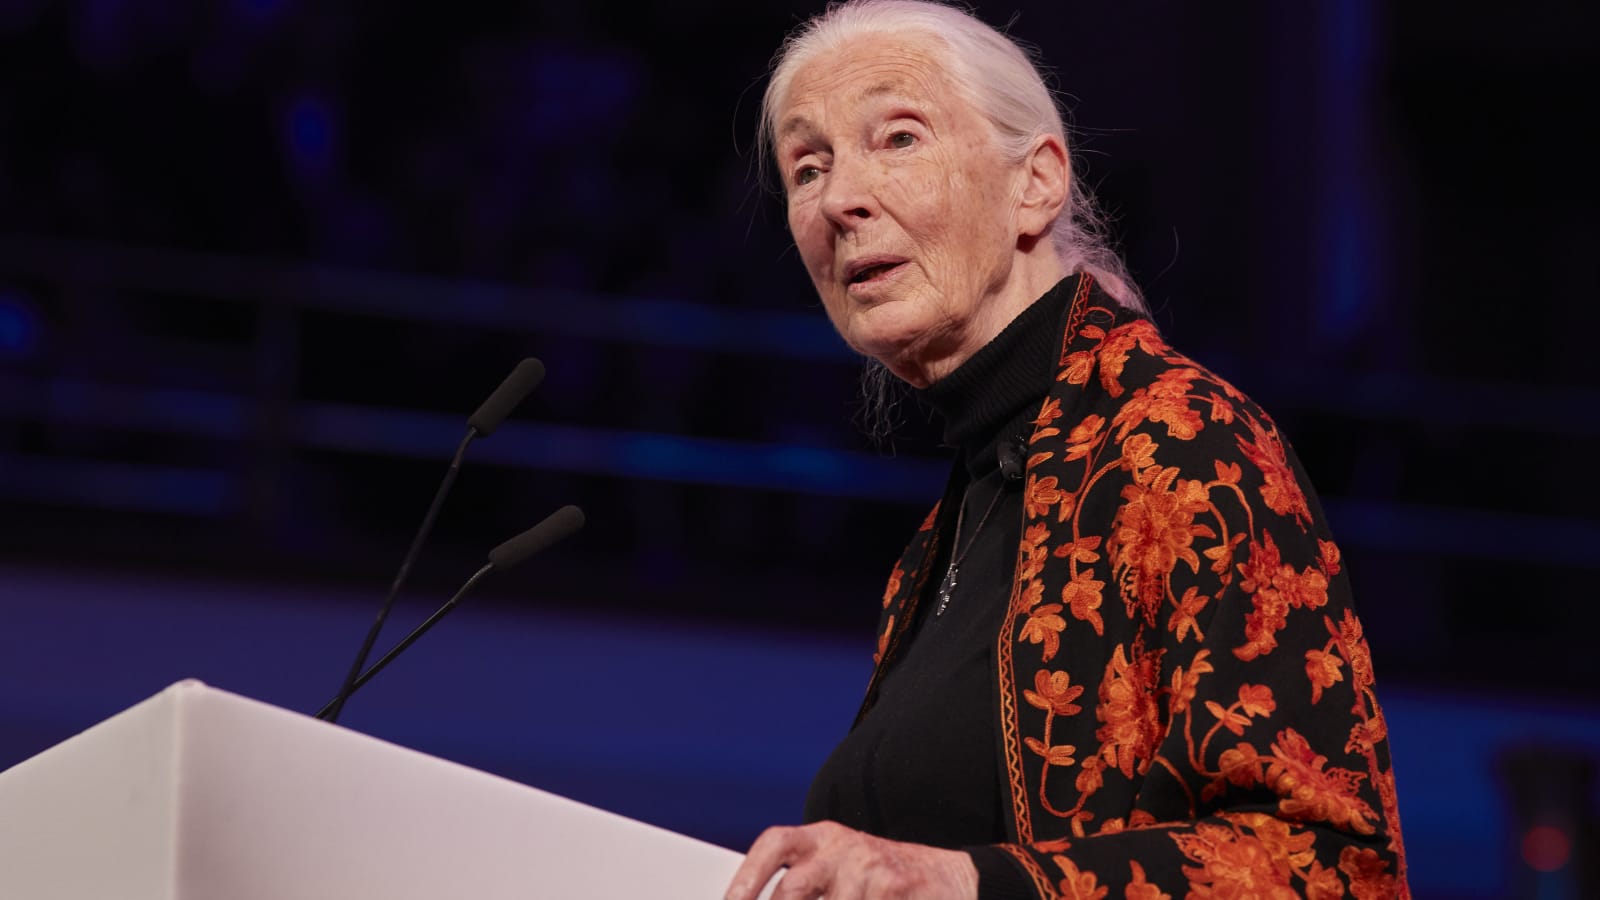 Jane Goodall Speaking Schedule 2022 Jane Goodall Tells How She Overcame Being Called 'Just A Girl'